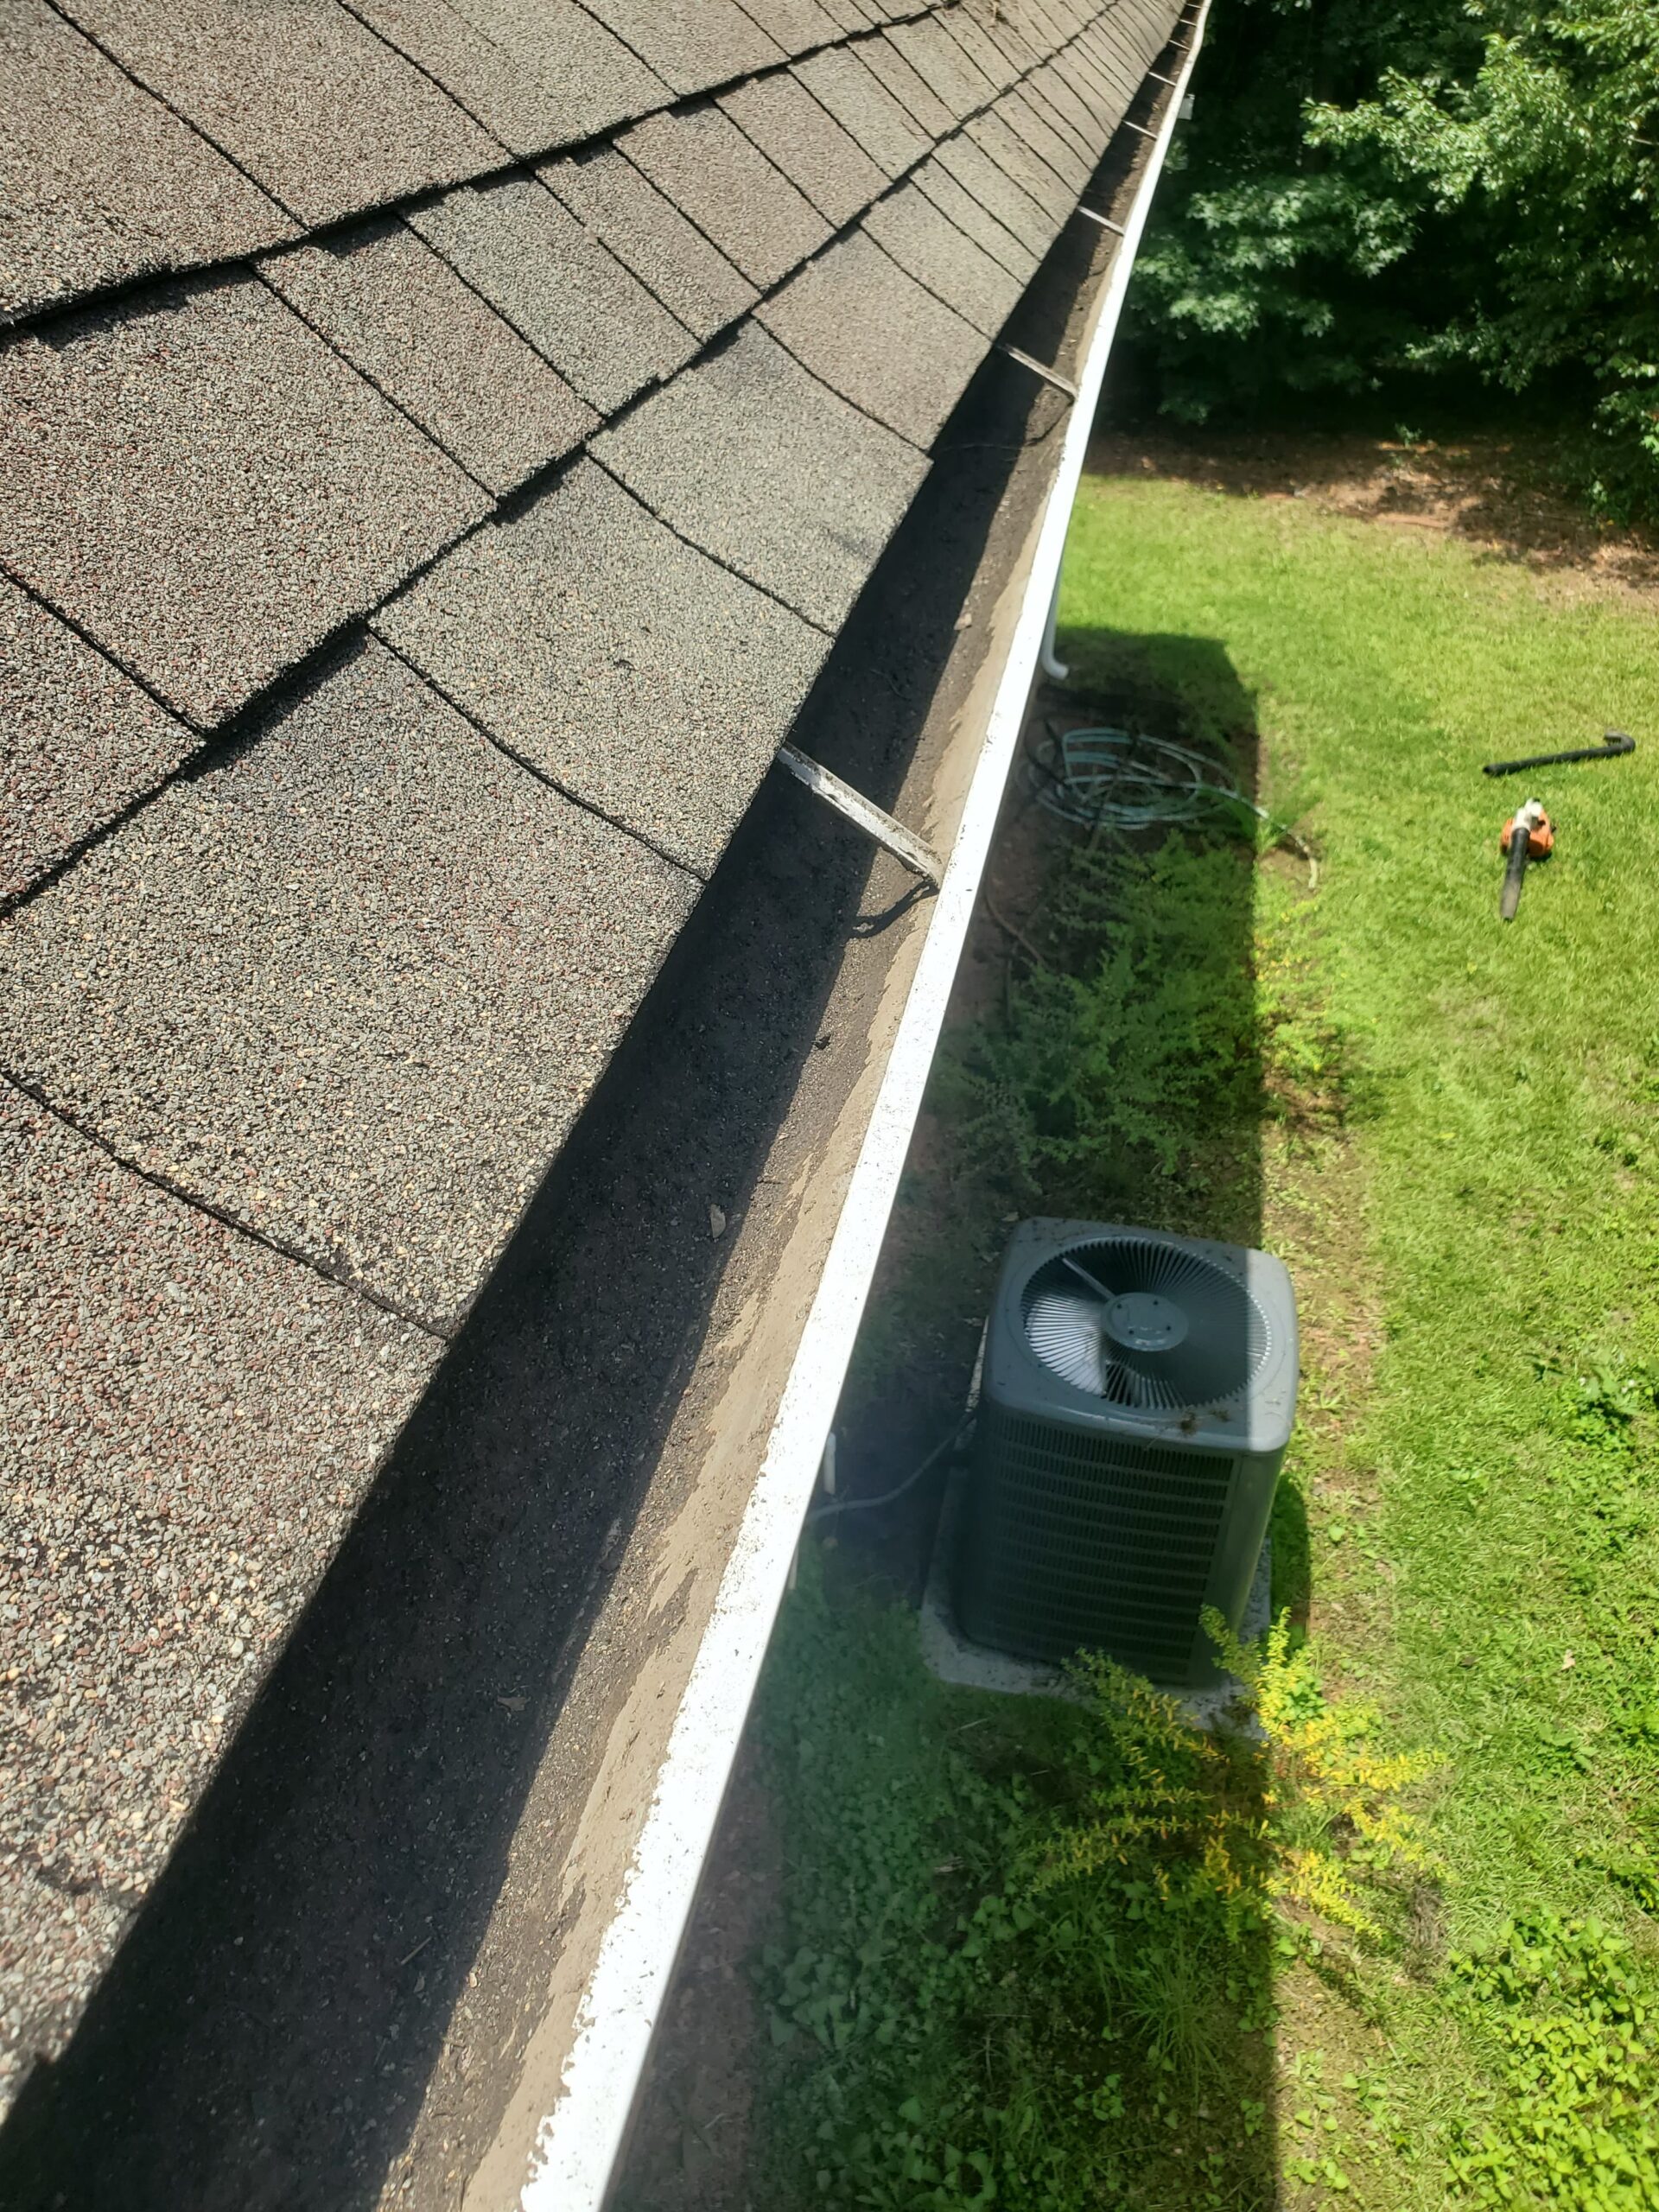 Gutter Cleaning Service Indianapolis In